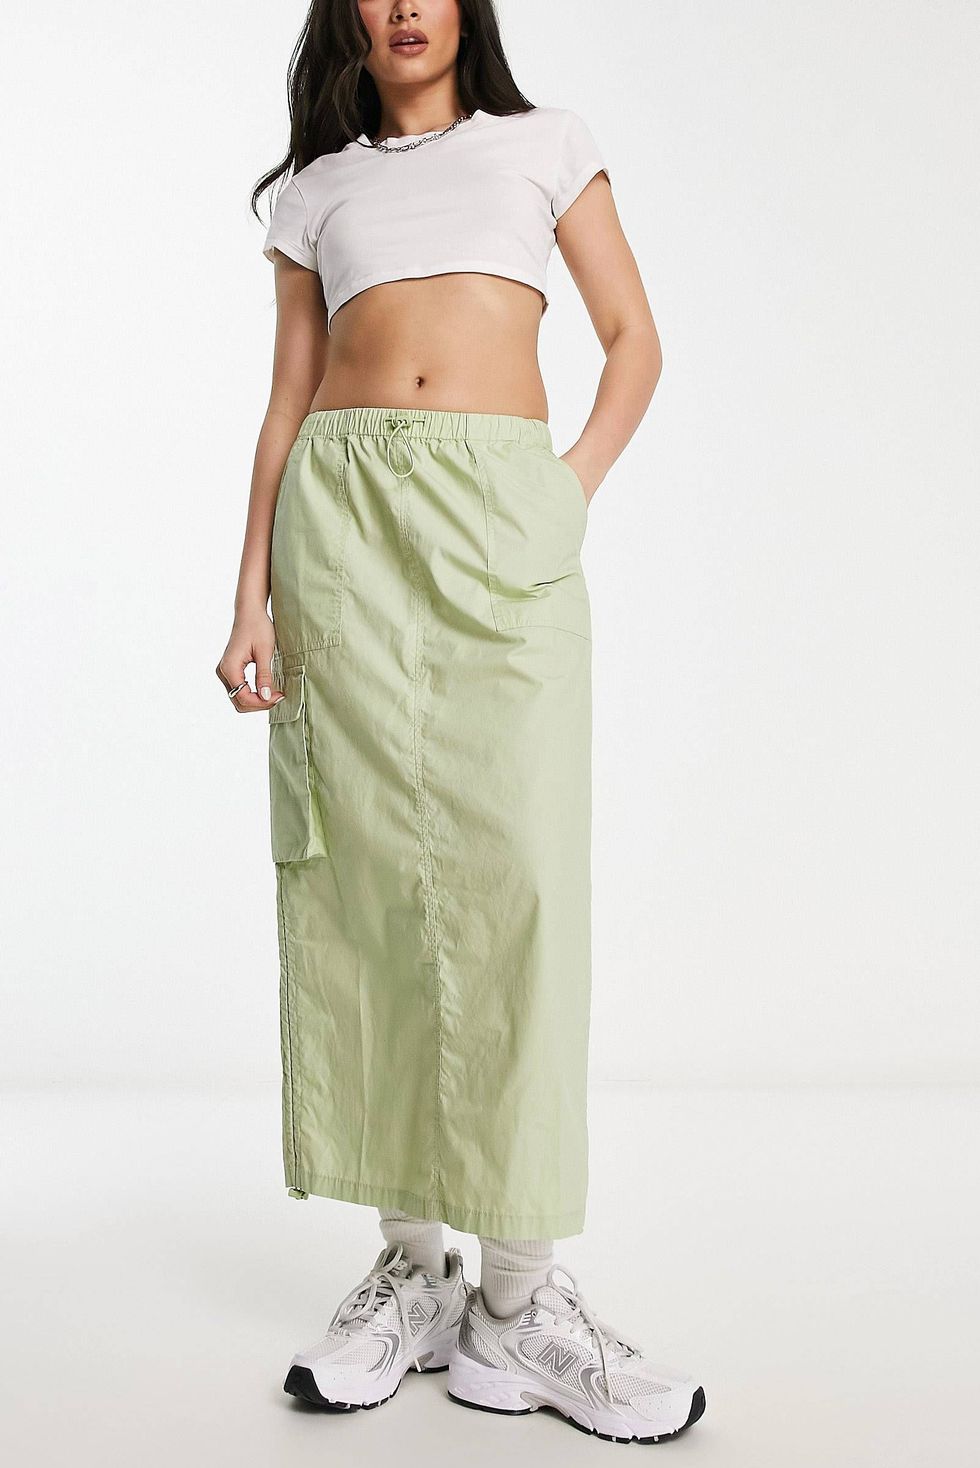 The best cargo skirts to shop in 2023